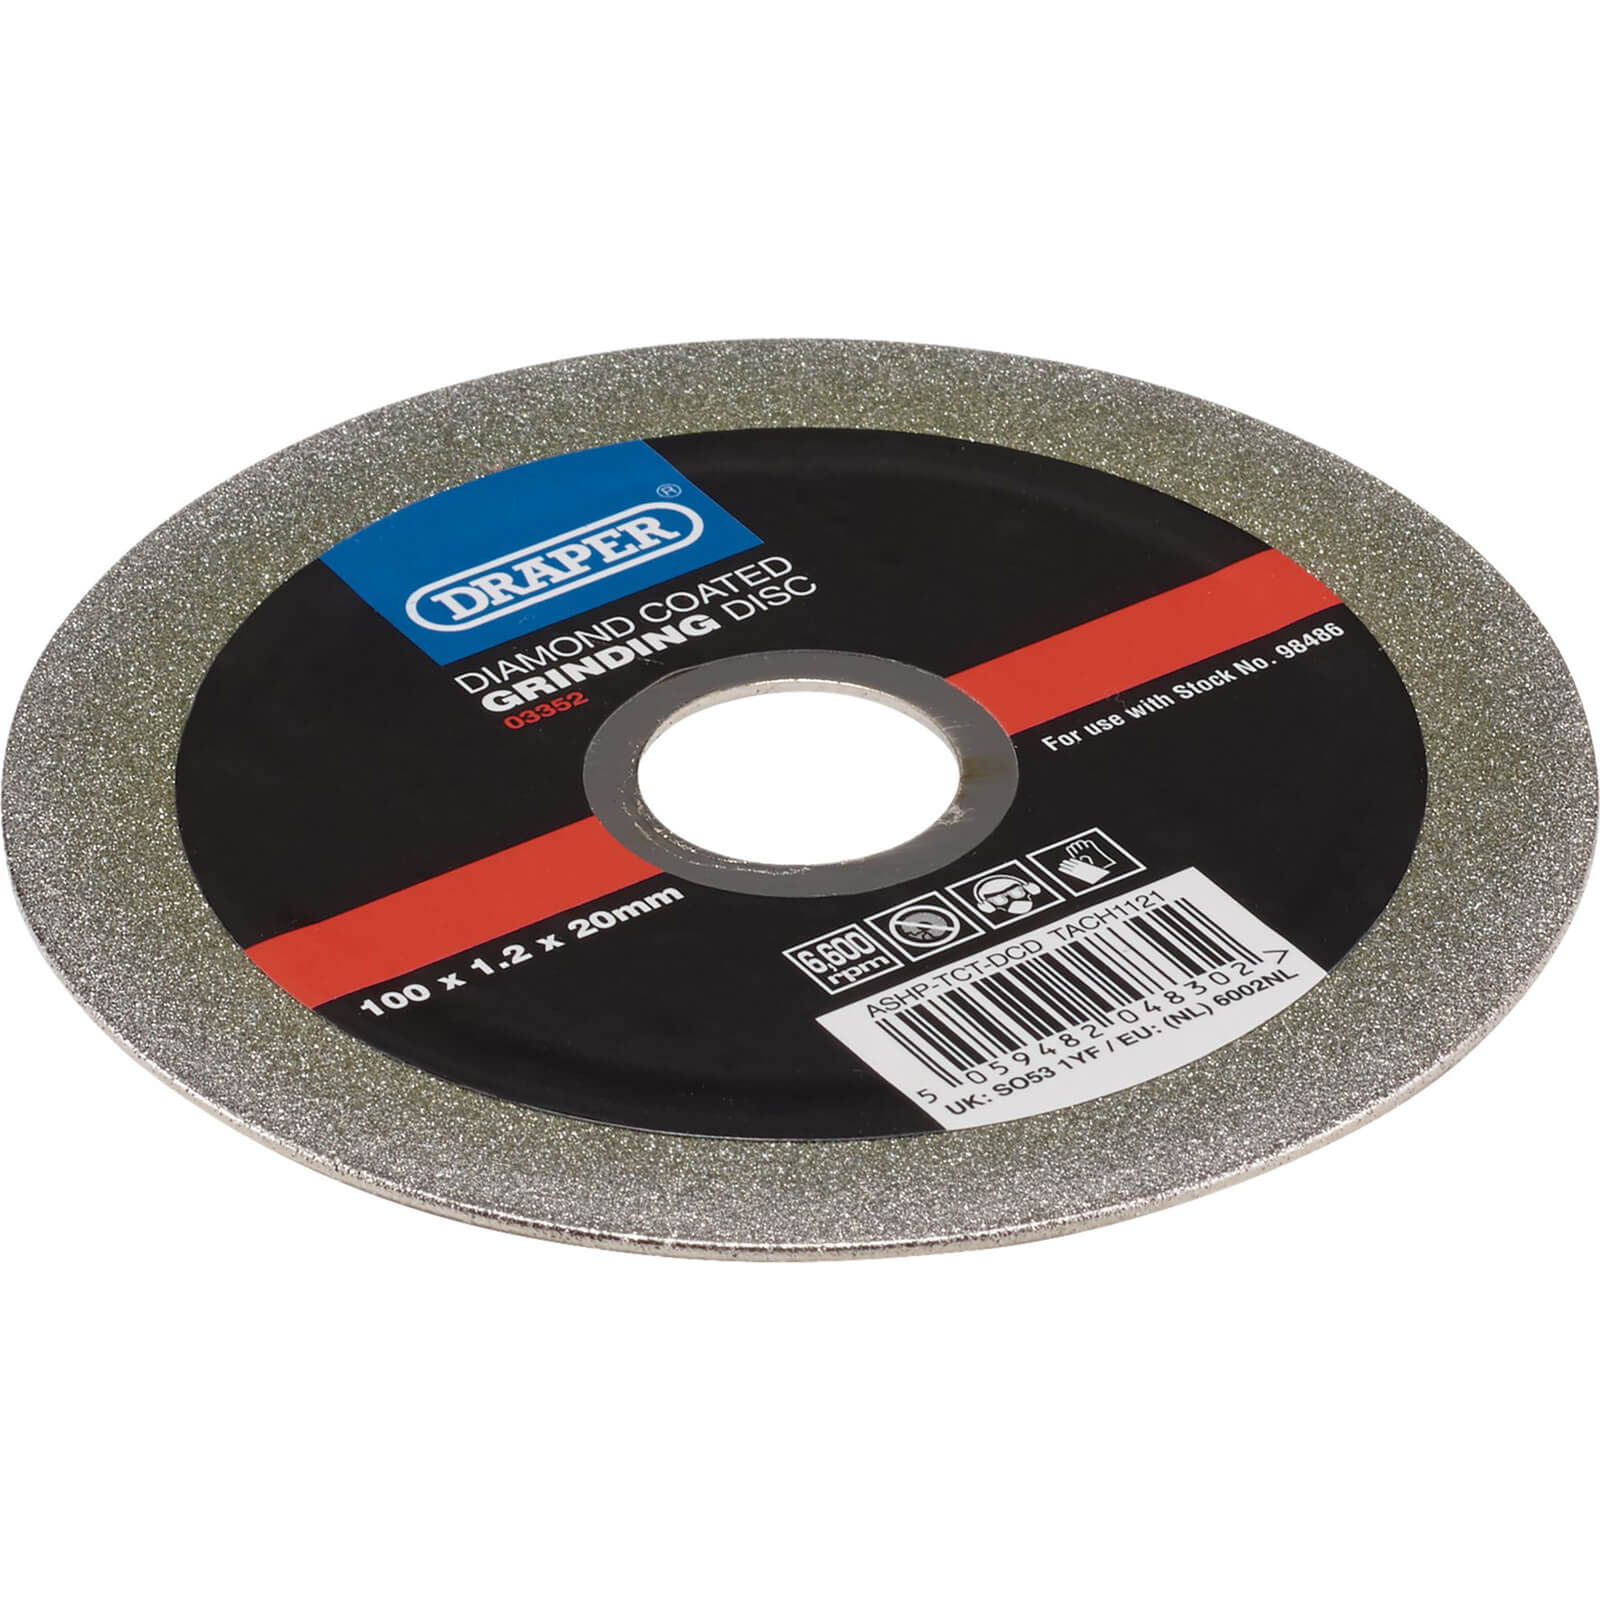 Image of Draper Diamond Coated Grinding Disc for 98485 Chainsaw Chain Sharpener